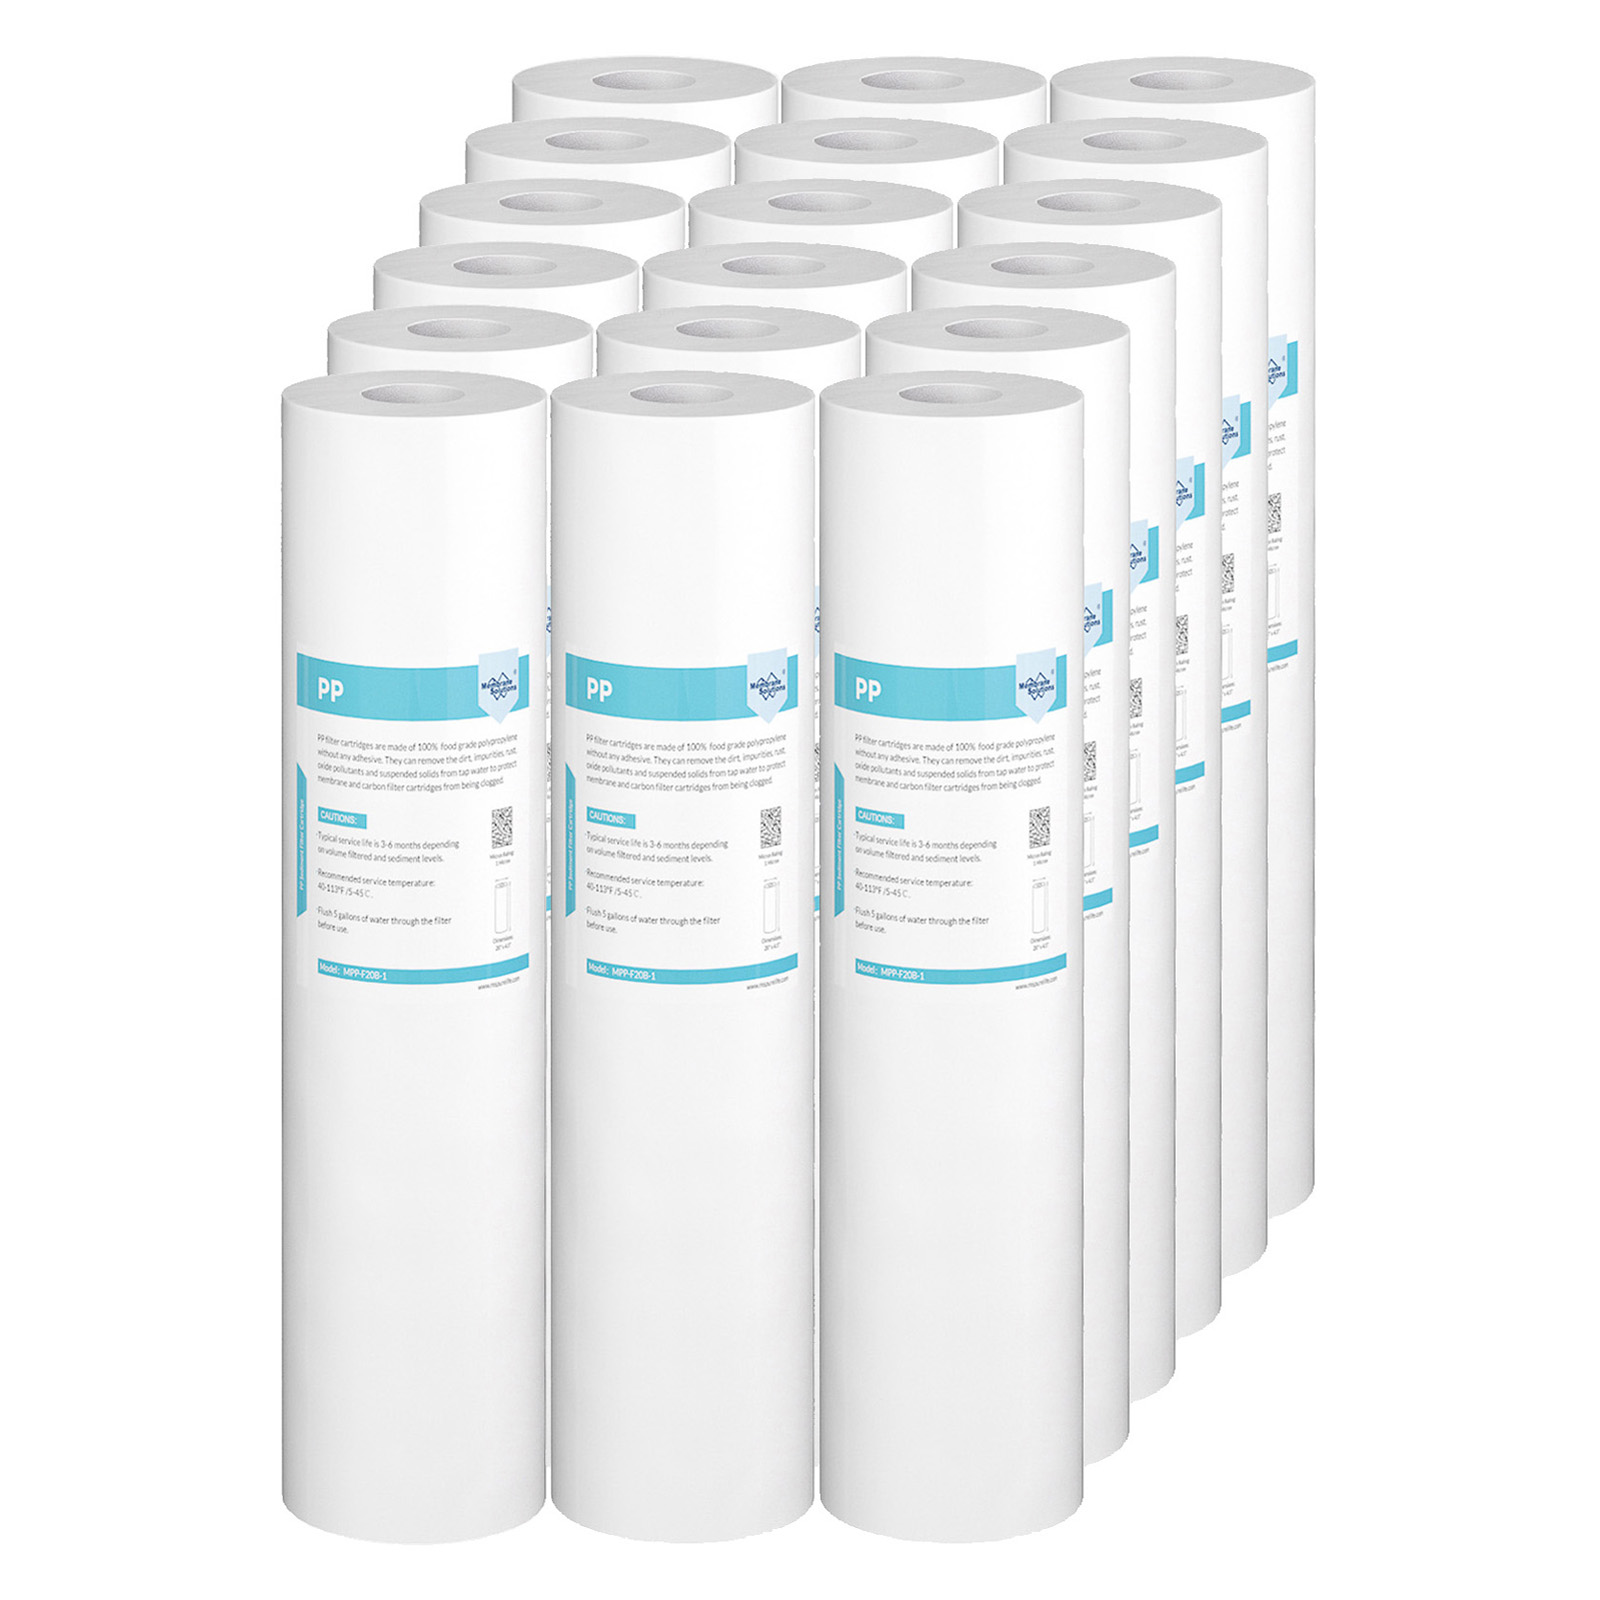 1-PACK Of 5 Micron 10"x4.5" Sediment Water Filter Whole House Big Blue by 